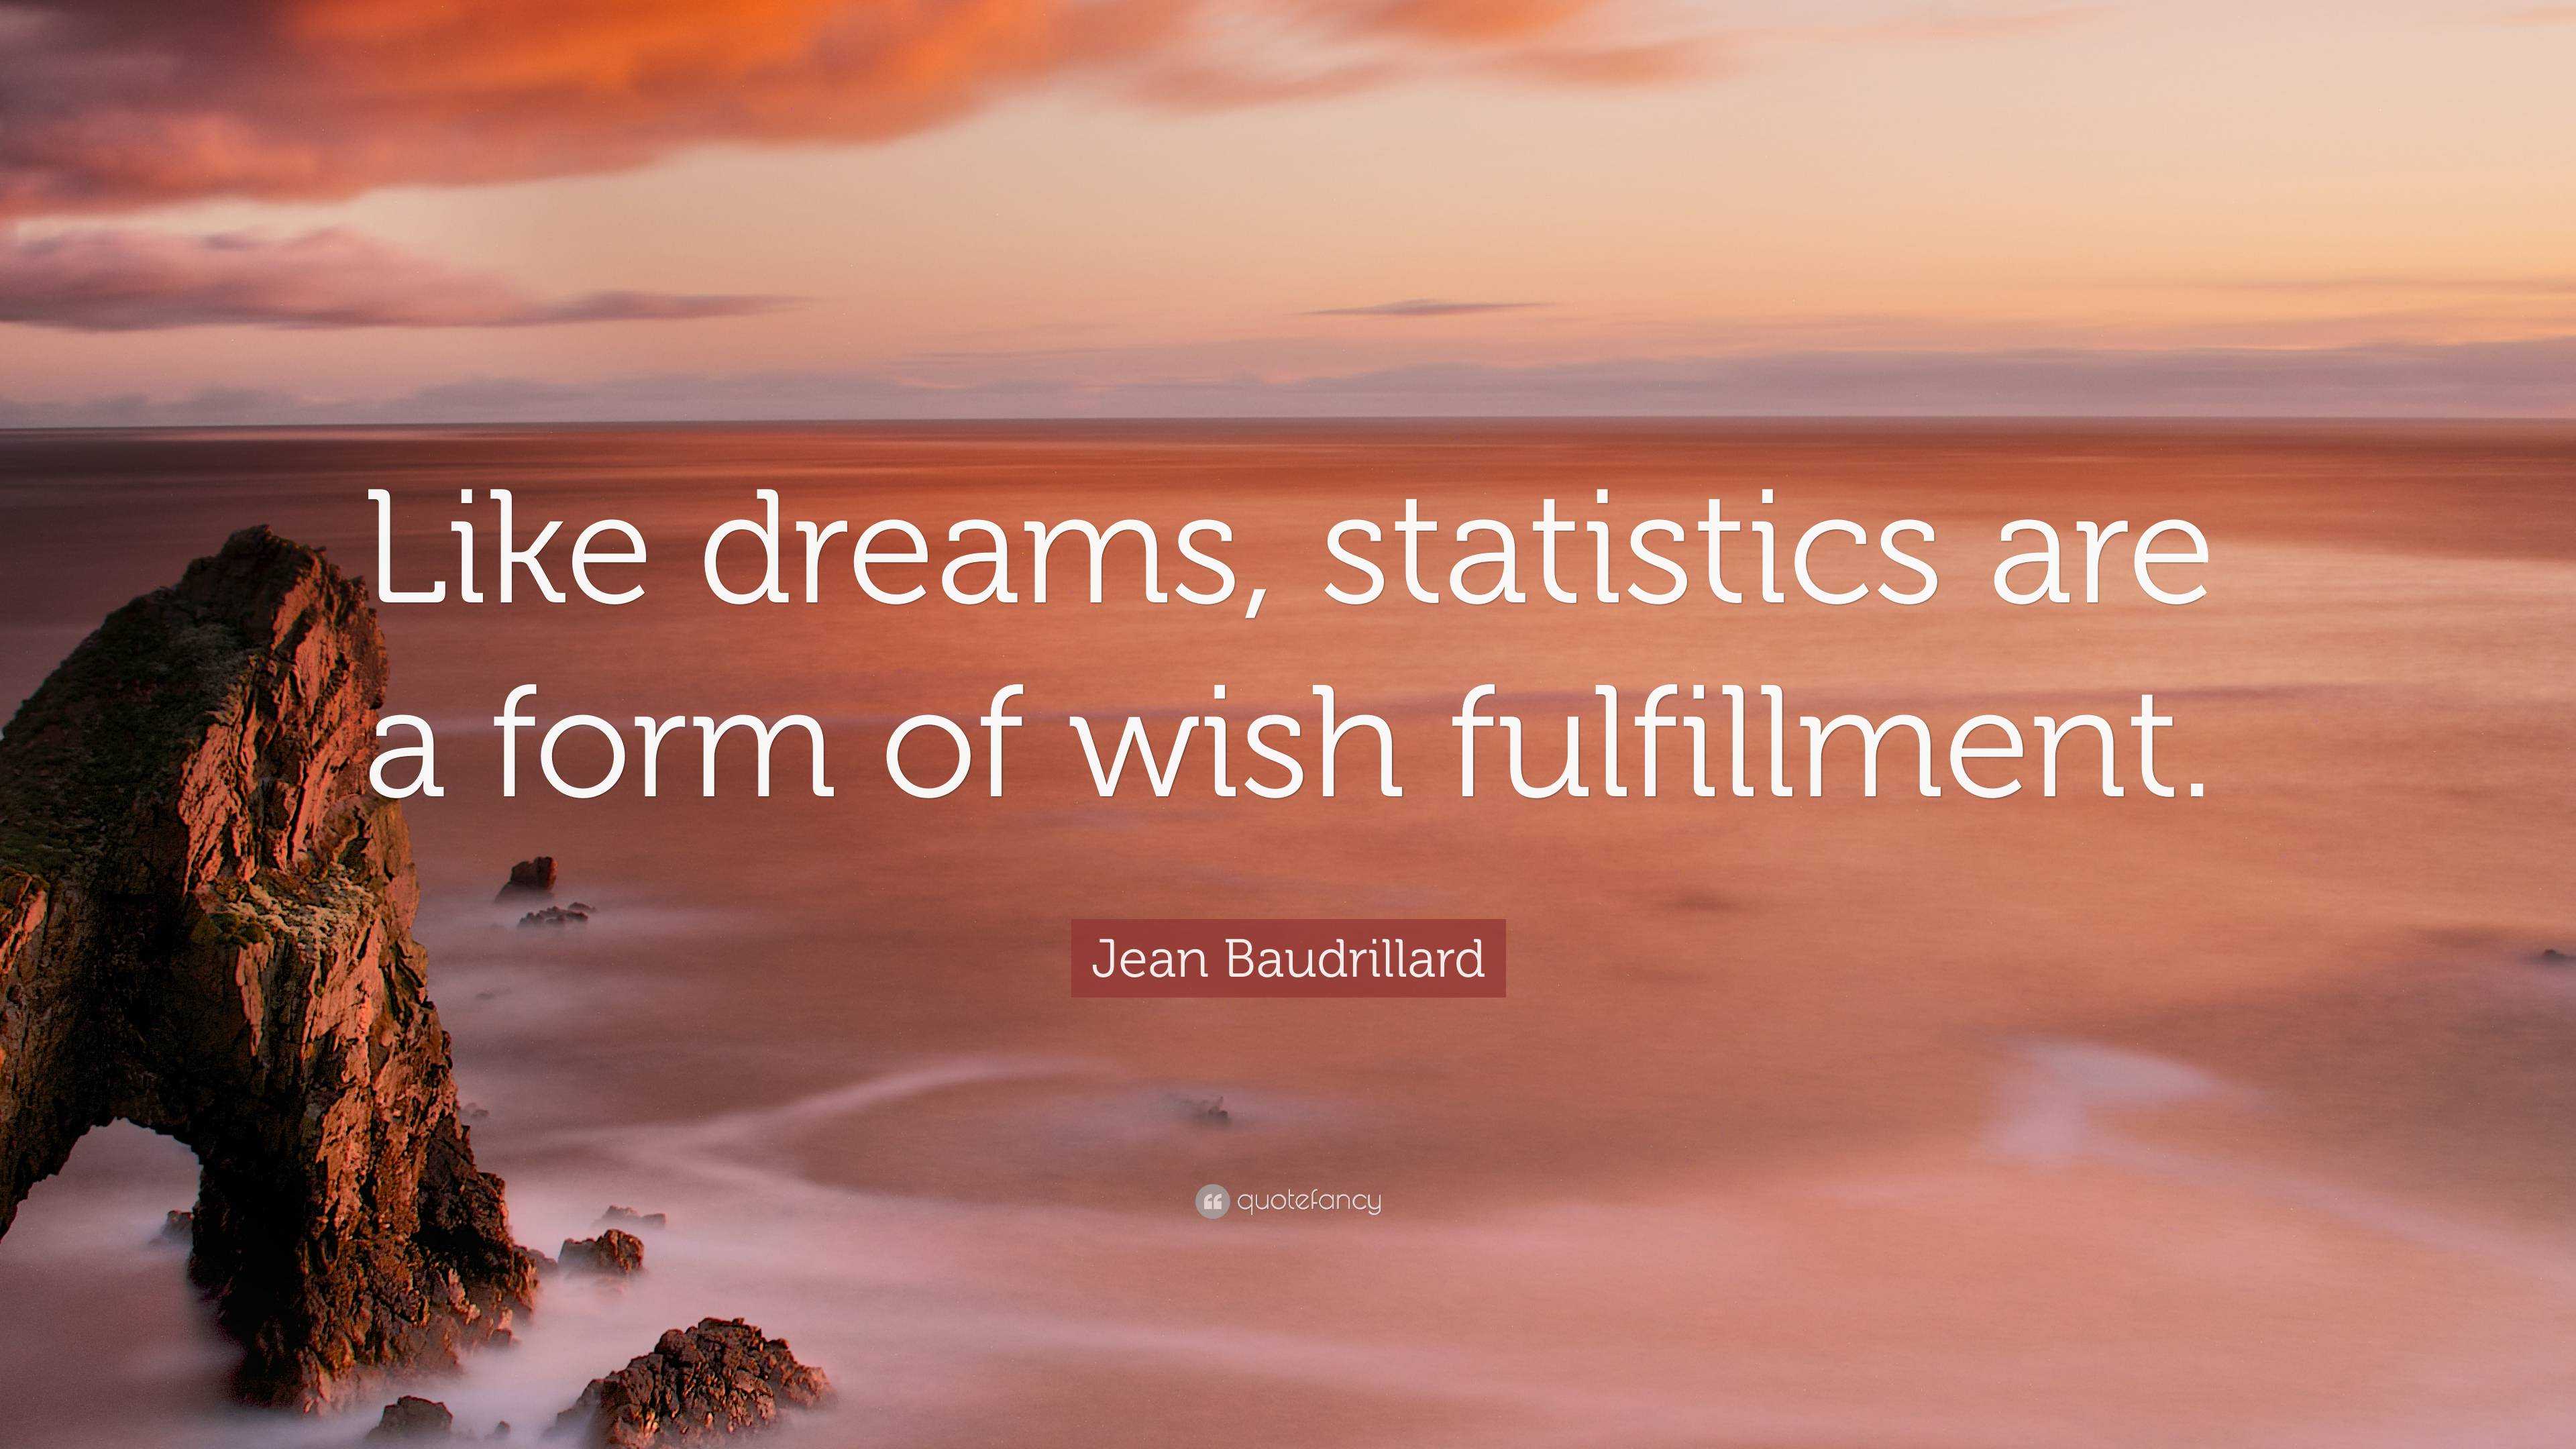 jean-baudrillard-quote-like-dreams-statistics-are-a-form-of-wish